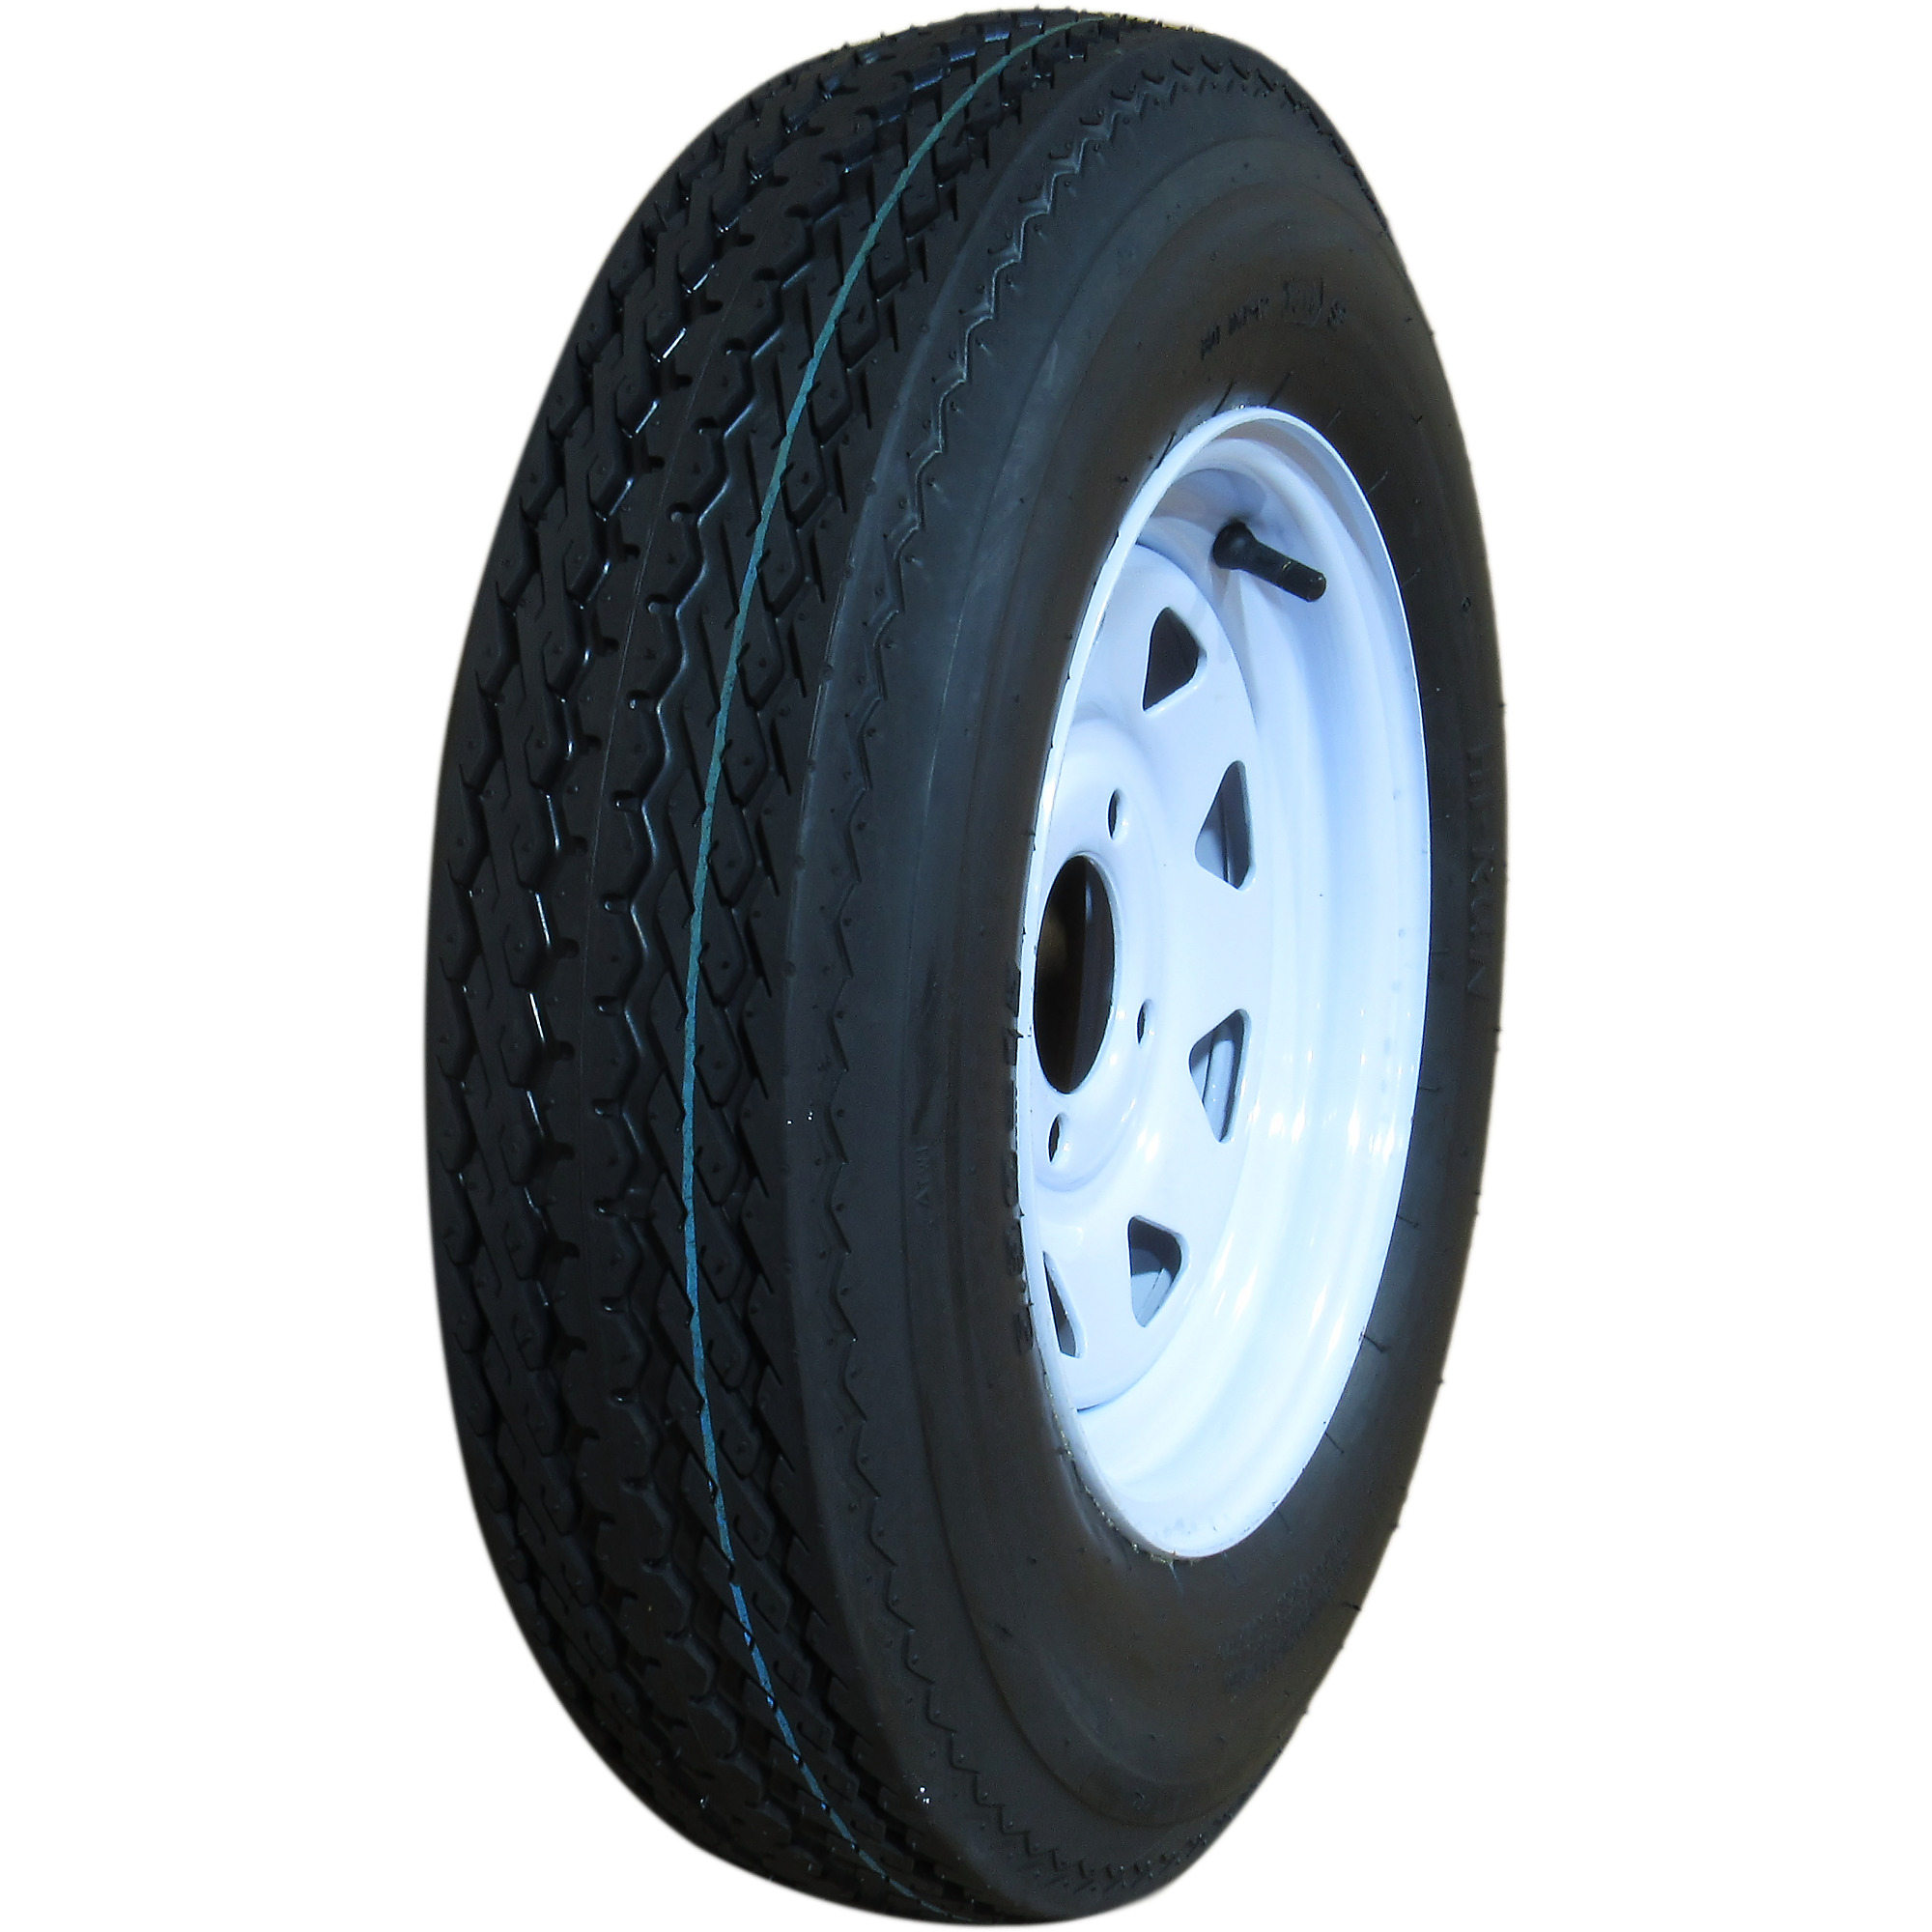 HI-RUN, Highway Trailer Tire Assembly, Bias-Ply, Tire Size 4.80-12 Load Range Rating C, Bolt Holes (qty.) 4 Model ASB1115